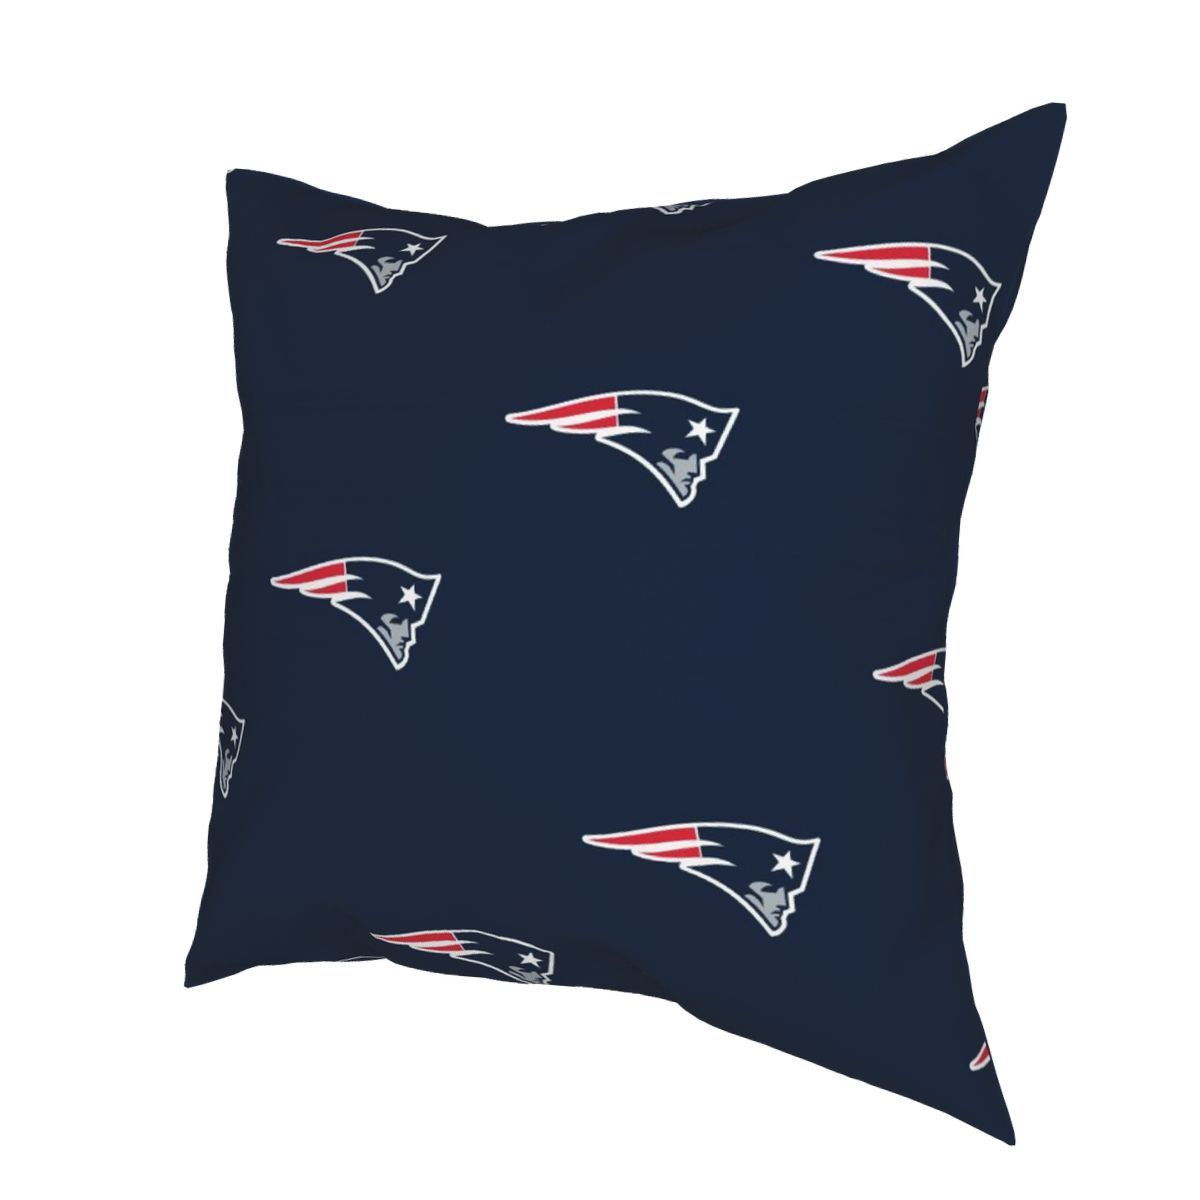 Custom Decorative Football Pillow Case New England Patriots Pillowcase Personalized Throw Pillow Covers